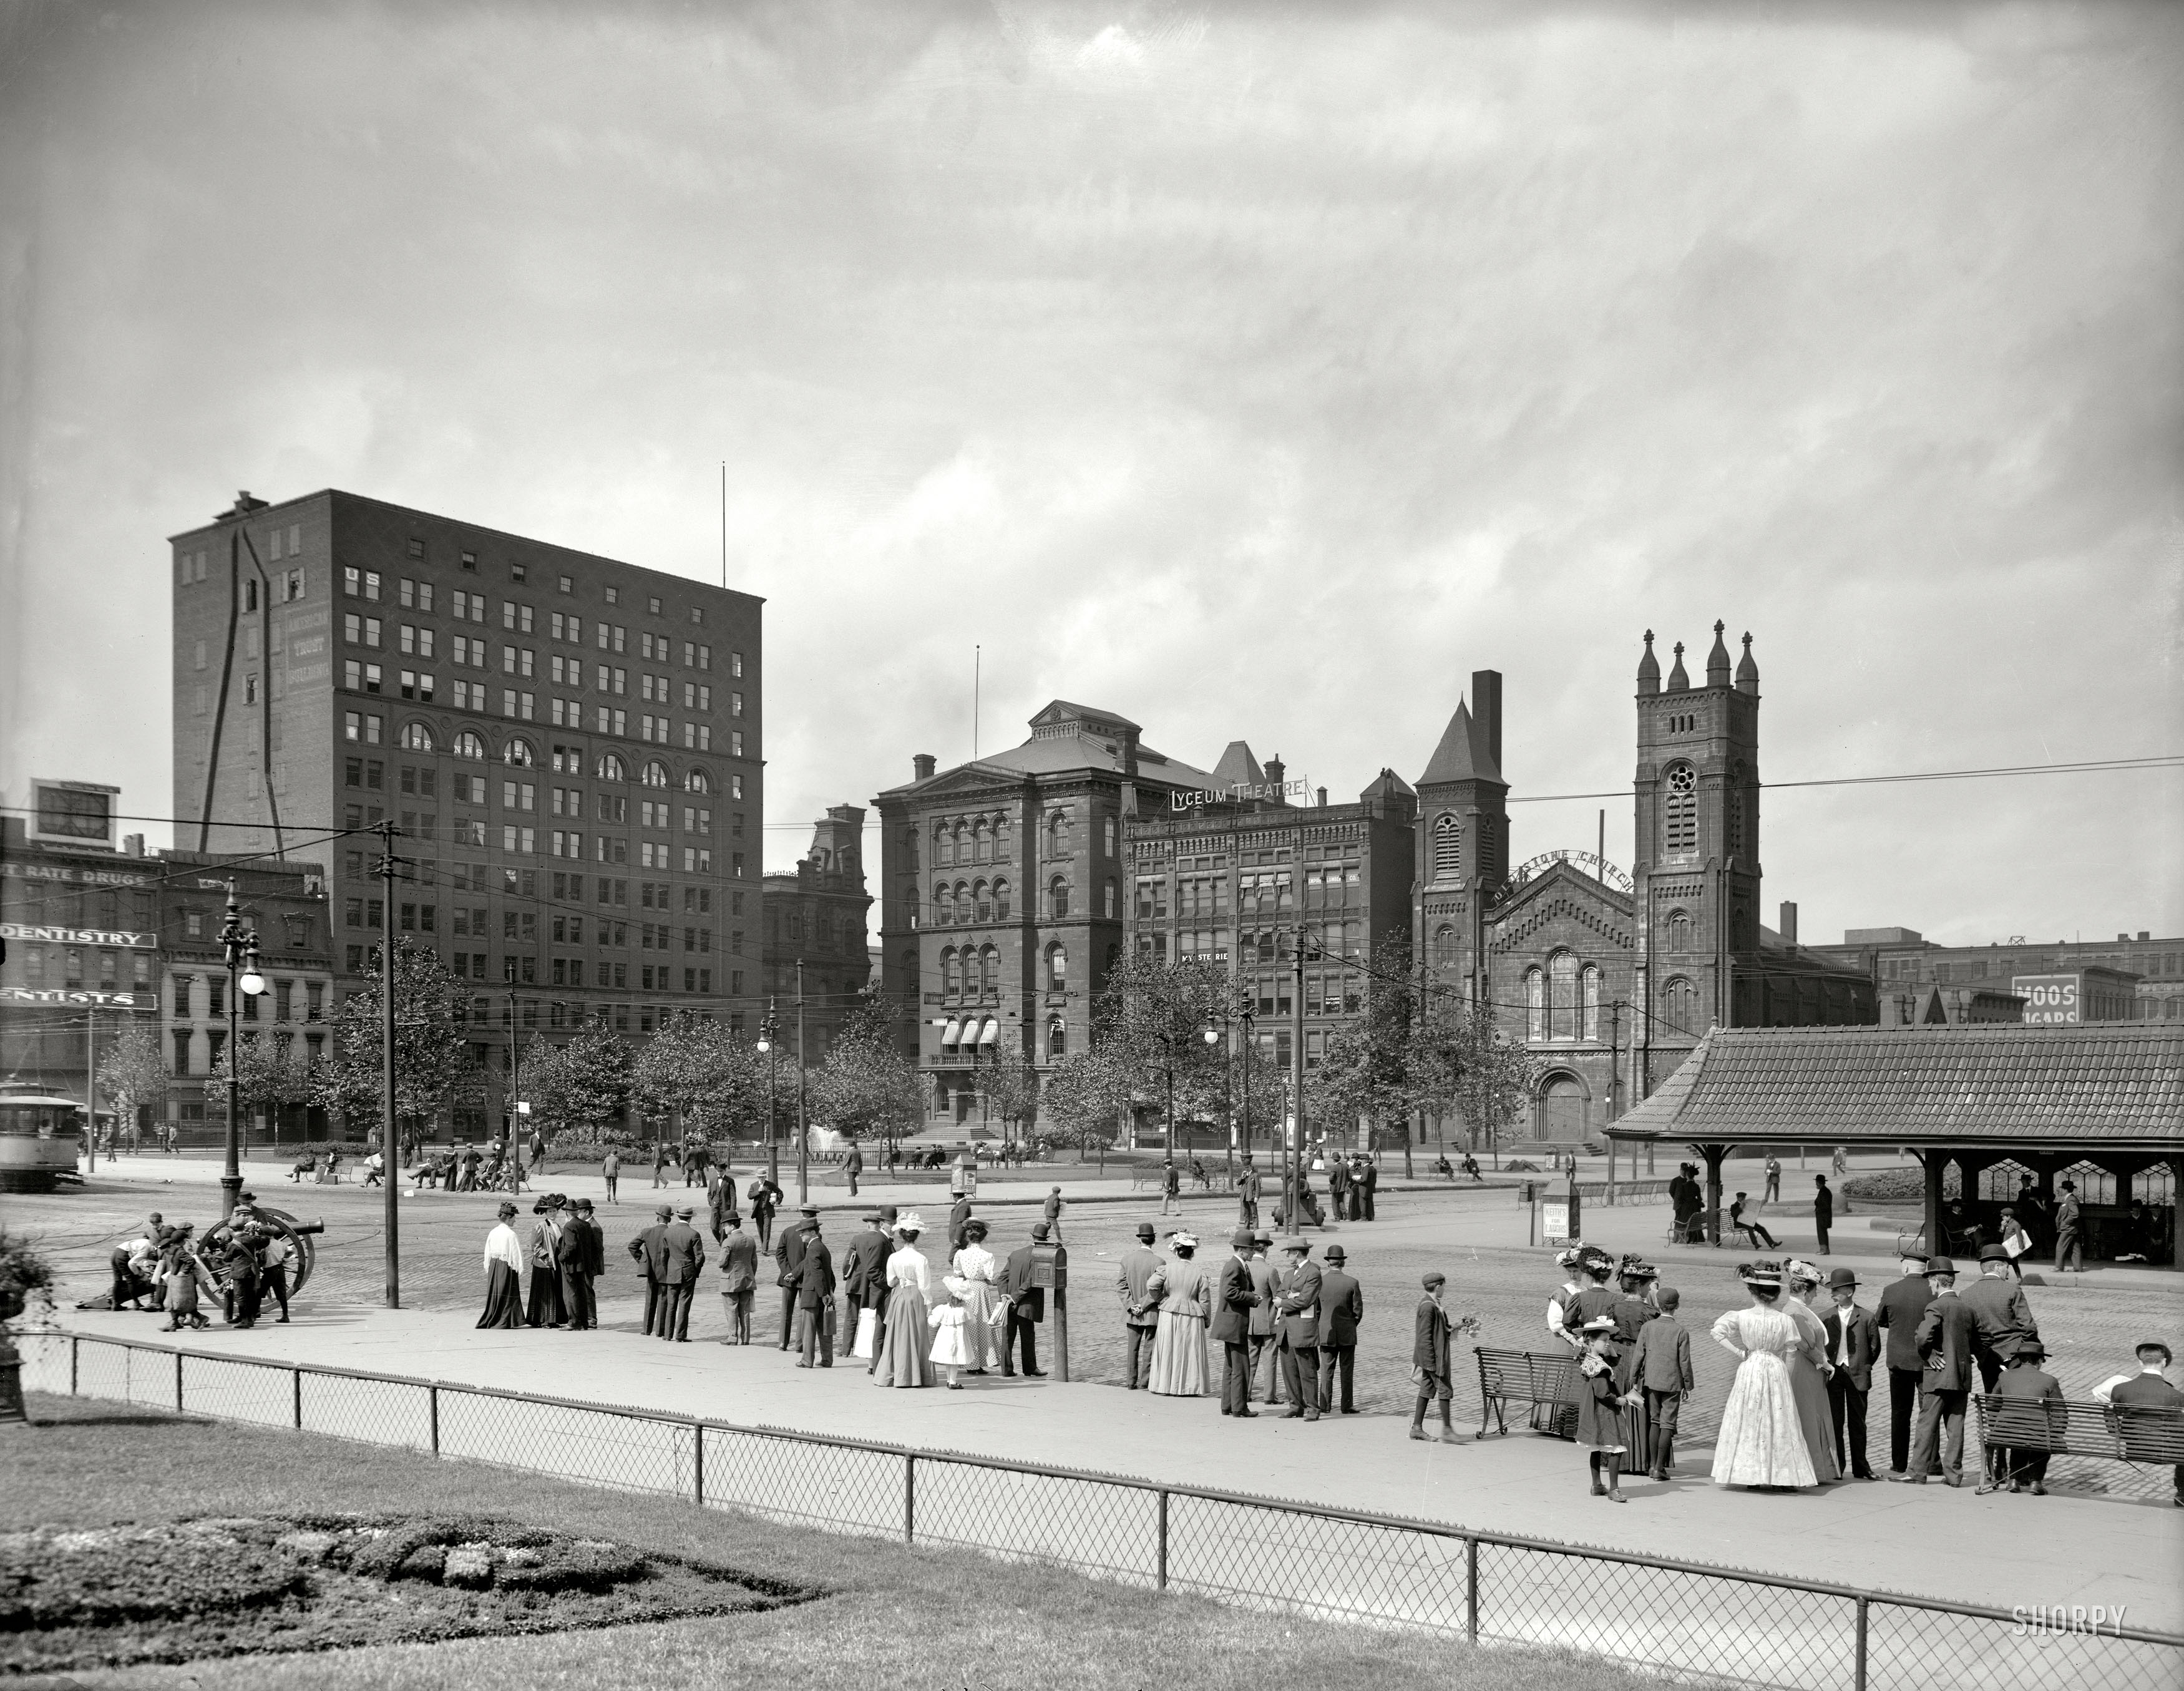 Cleveland, Ohio, circa 1905. "Public Square. Lyceum Theatre and Old Stone Church in background; people waiting for streetcar." 8x10 inch dry plate glass negative, Detroit Publishing Company. View full size.